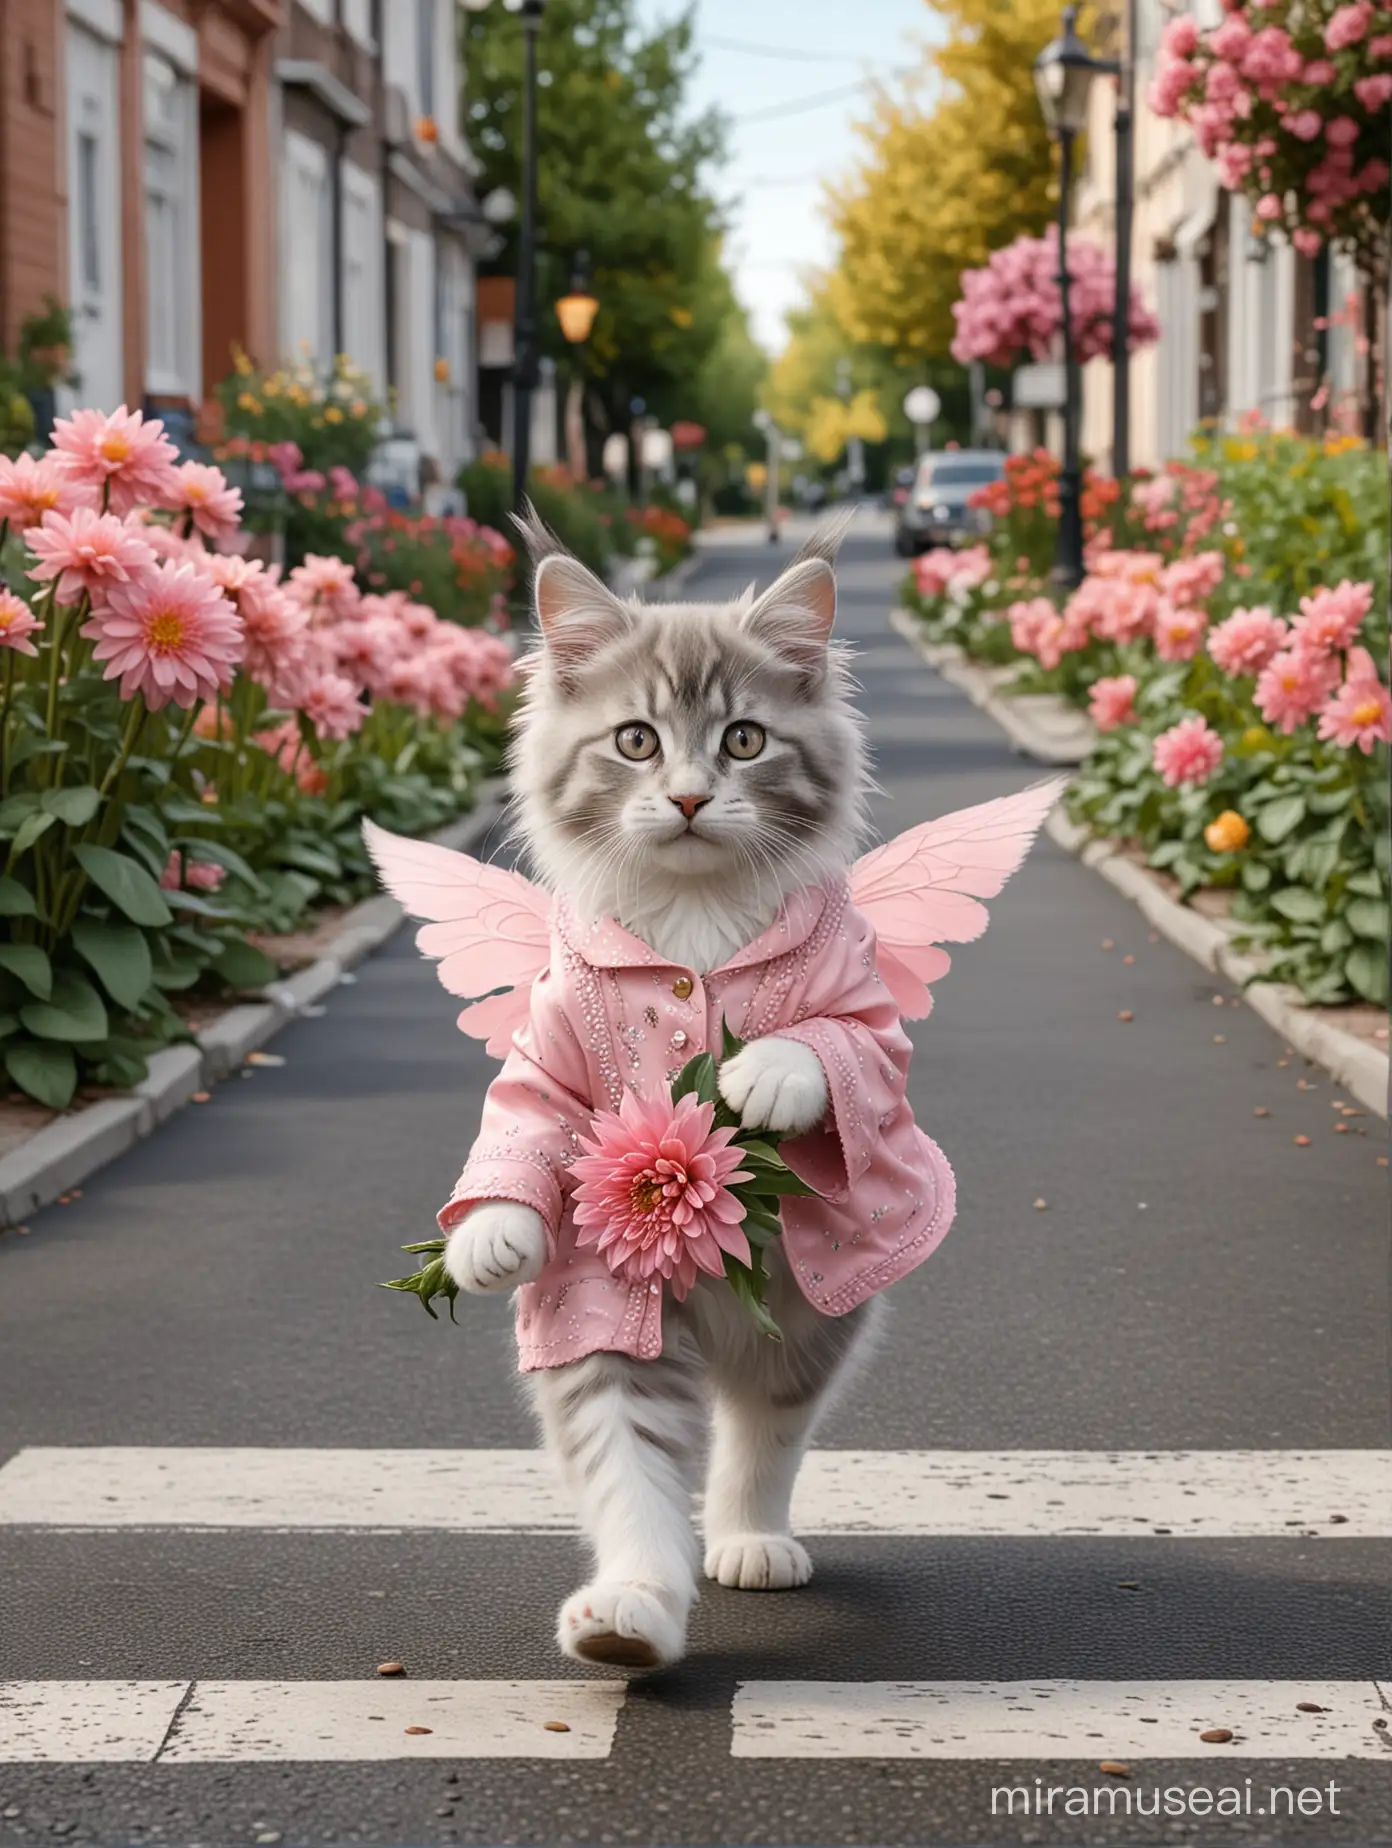 Adorable Maine Coon Kitten with Elf Wings Crossing Zebra Crossing in Chanel Apricot Suit